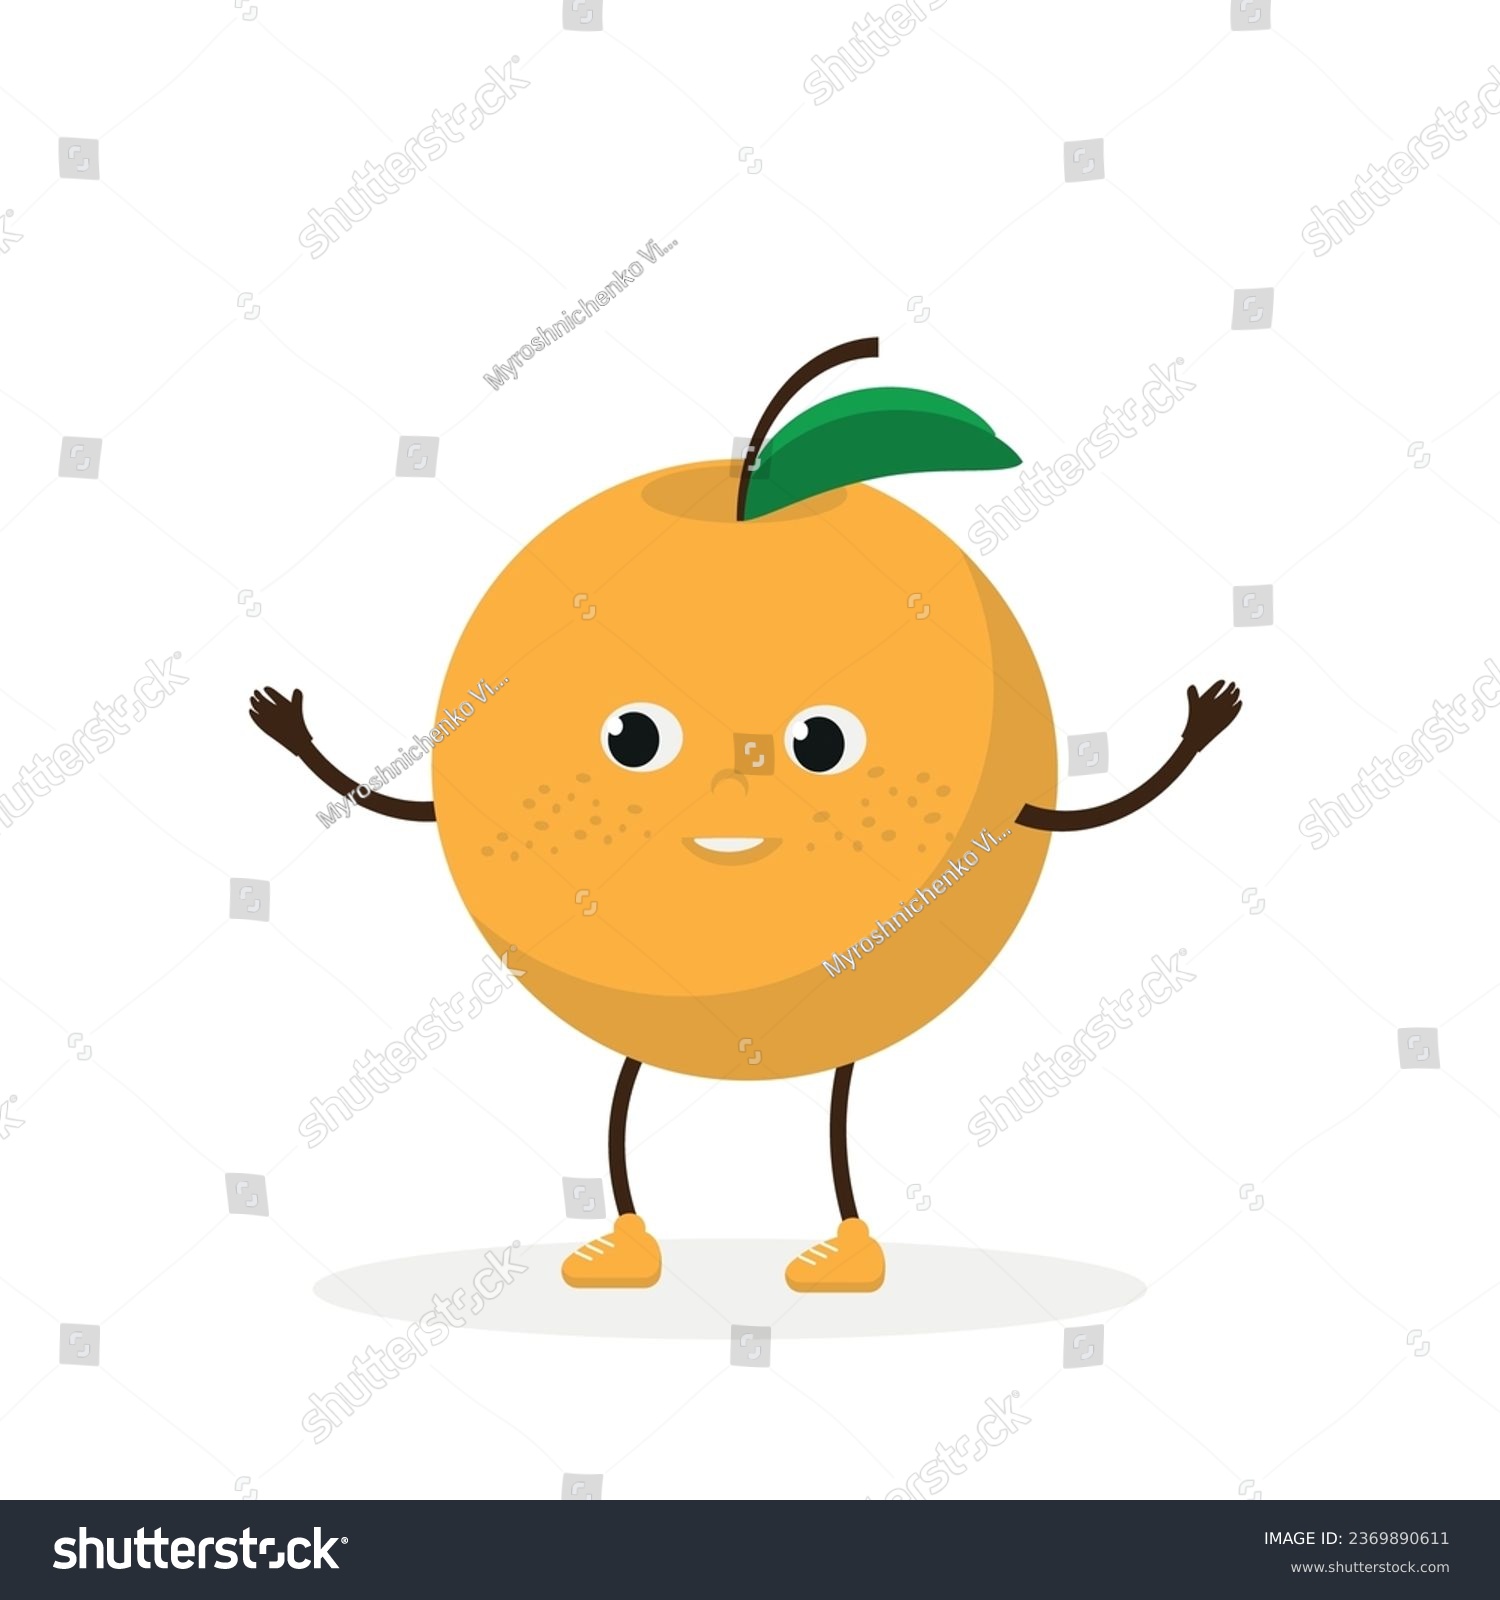 SVG of Vector orange. Cute baby character.Flat illustration. Suitable for animation, using in web, apps, books, education projects. No transparency, solid colors only. Svg, lottie without bags. svg